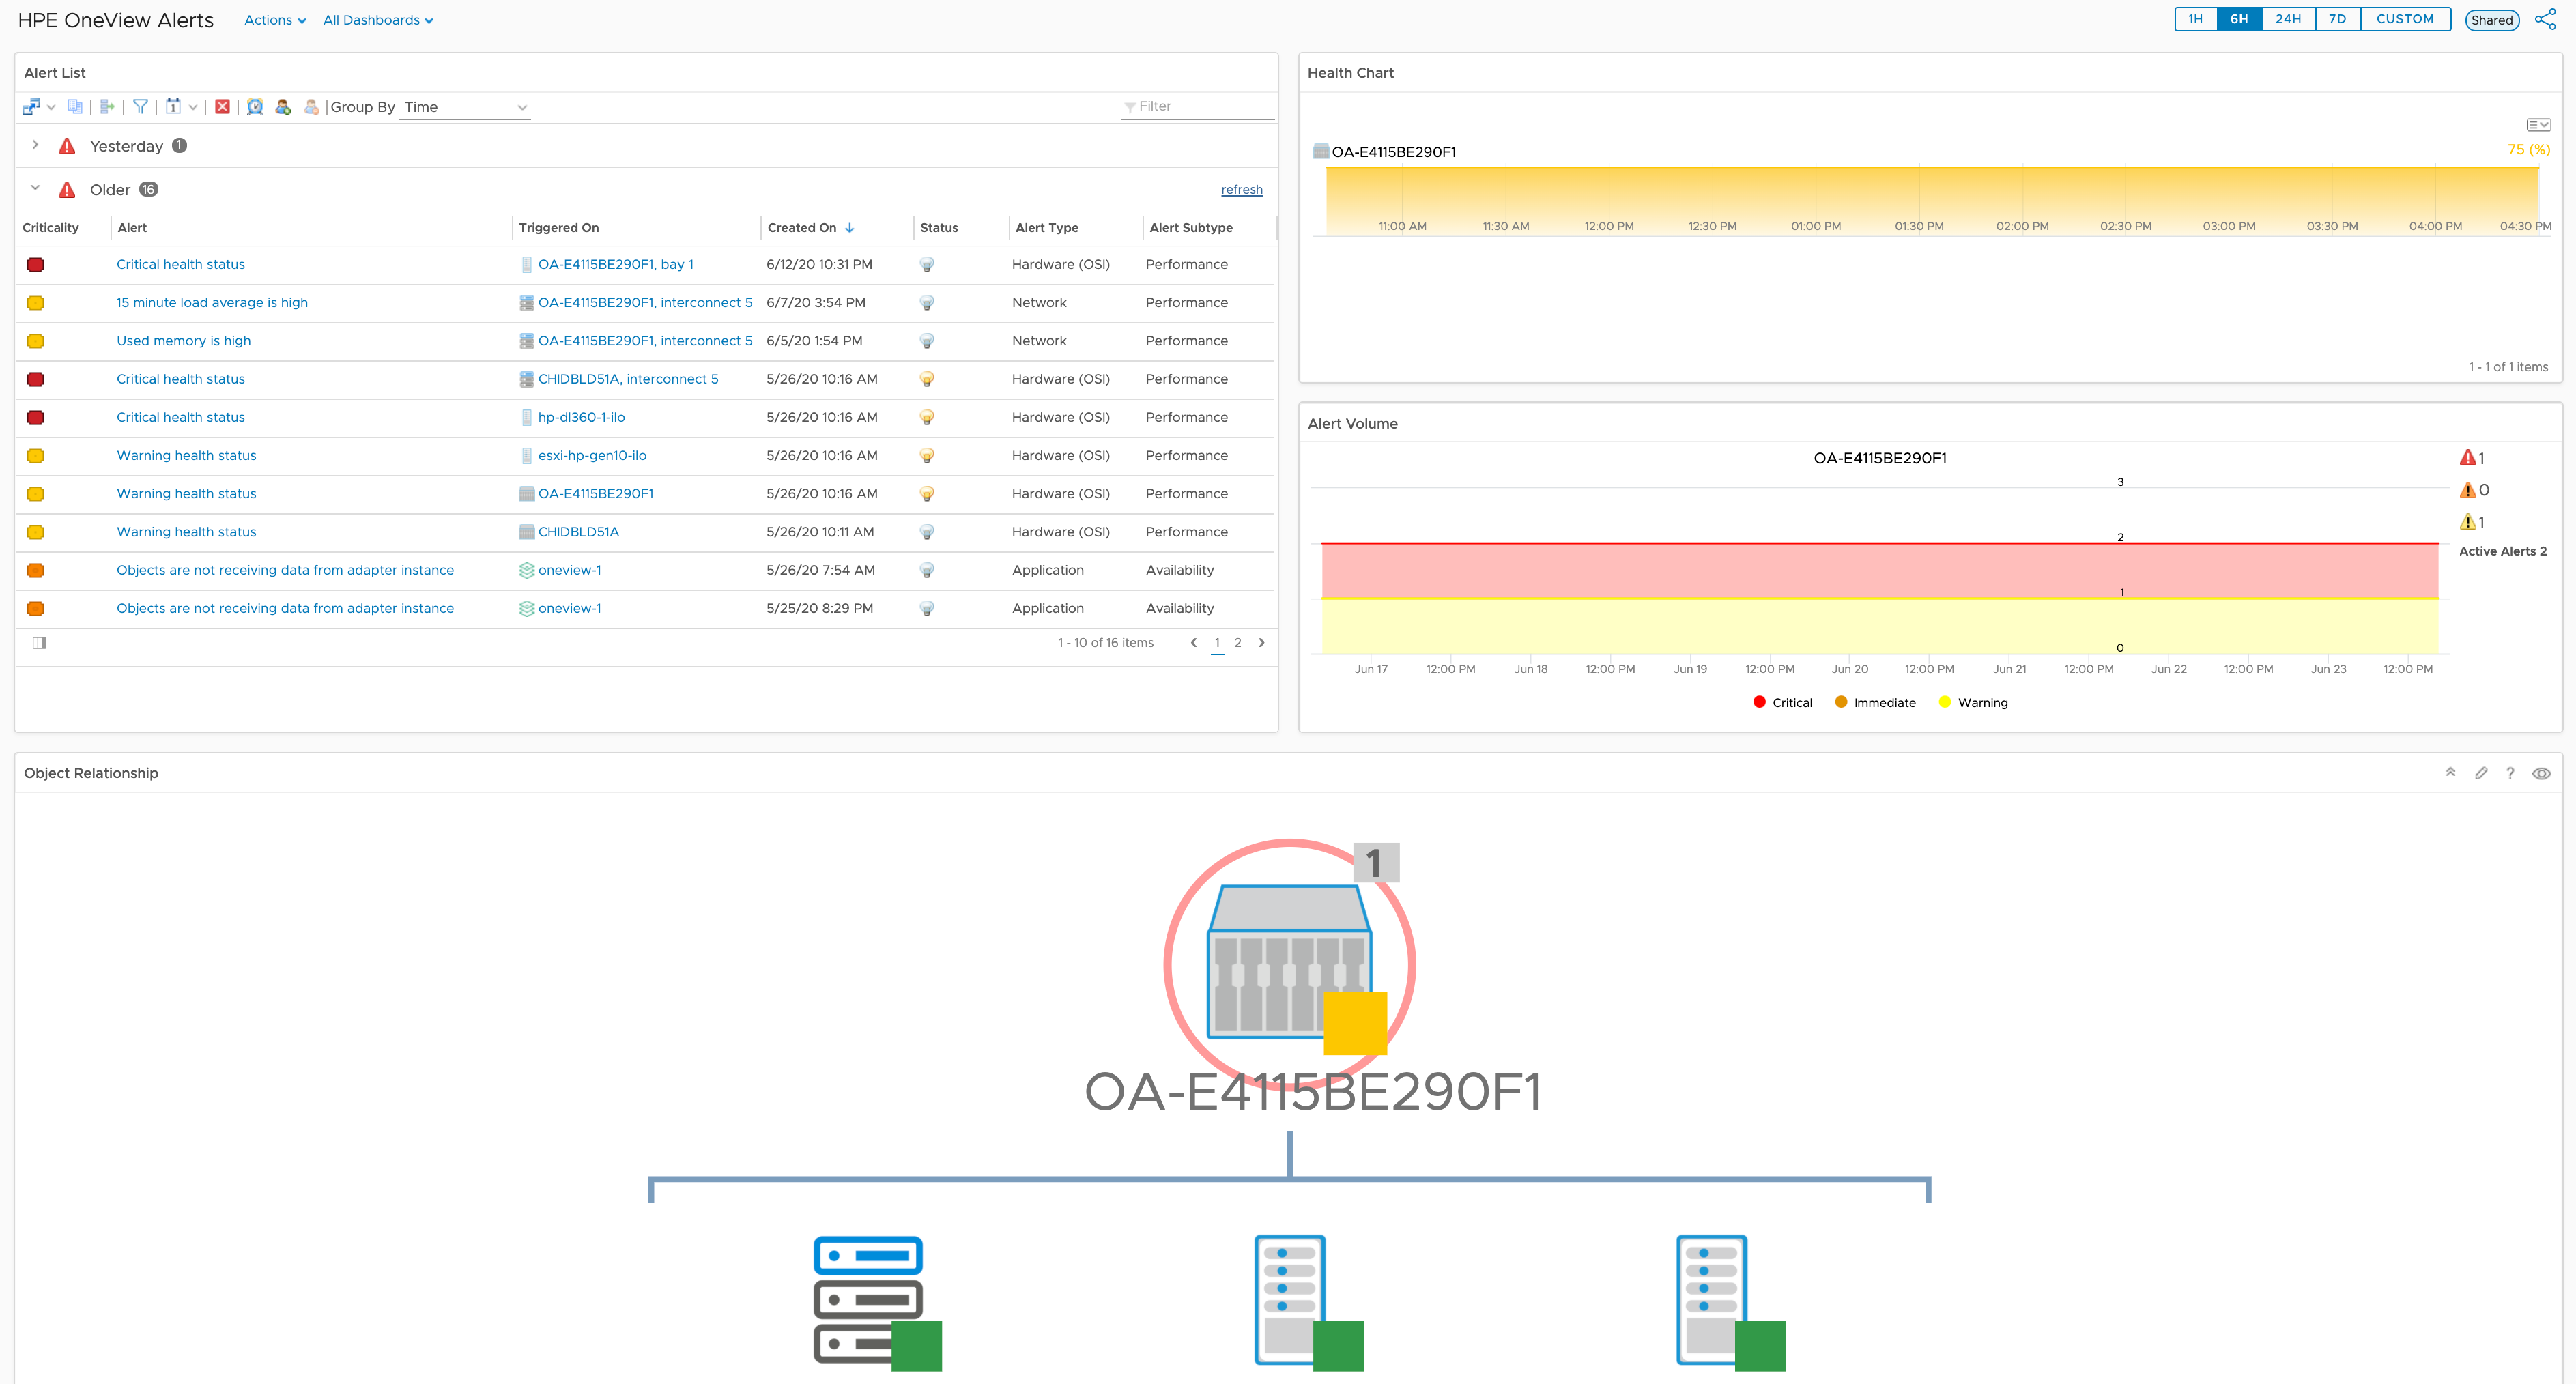 003_hpe_oneview_alerts_dashboard